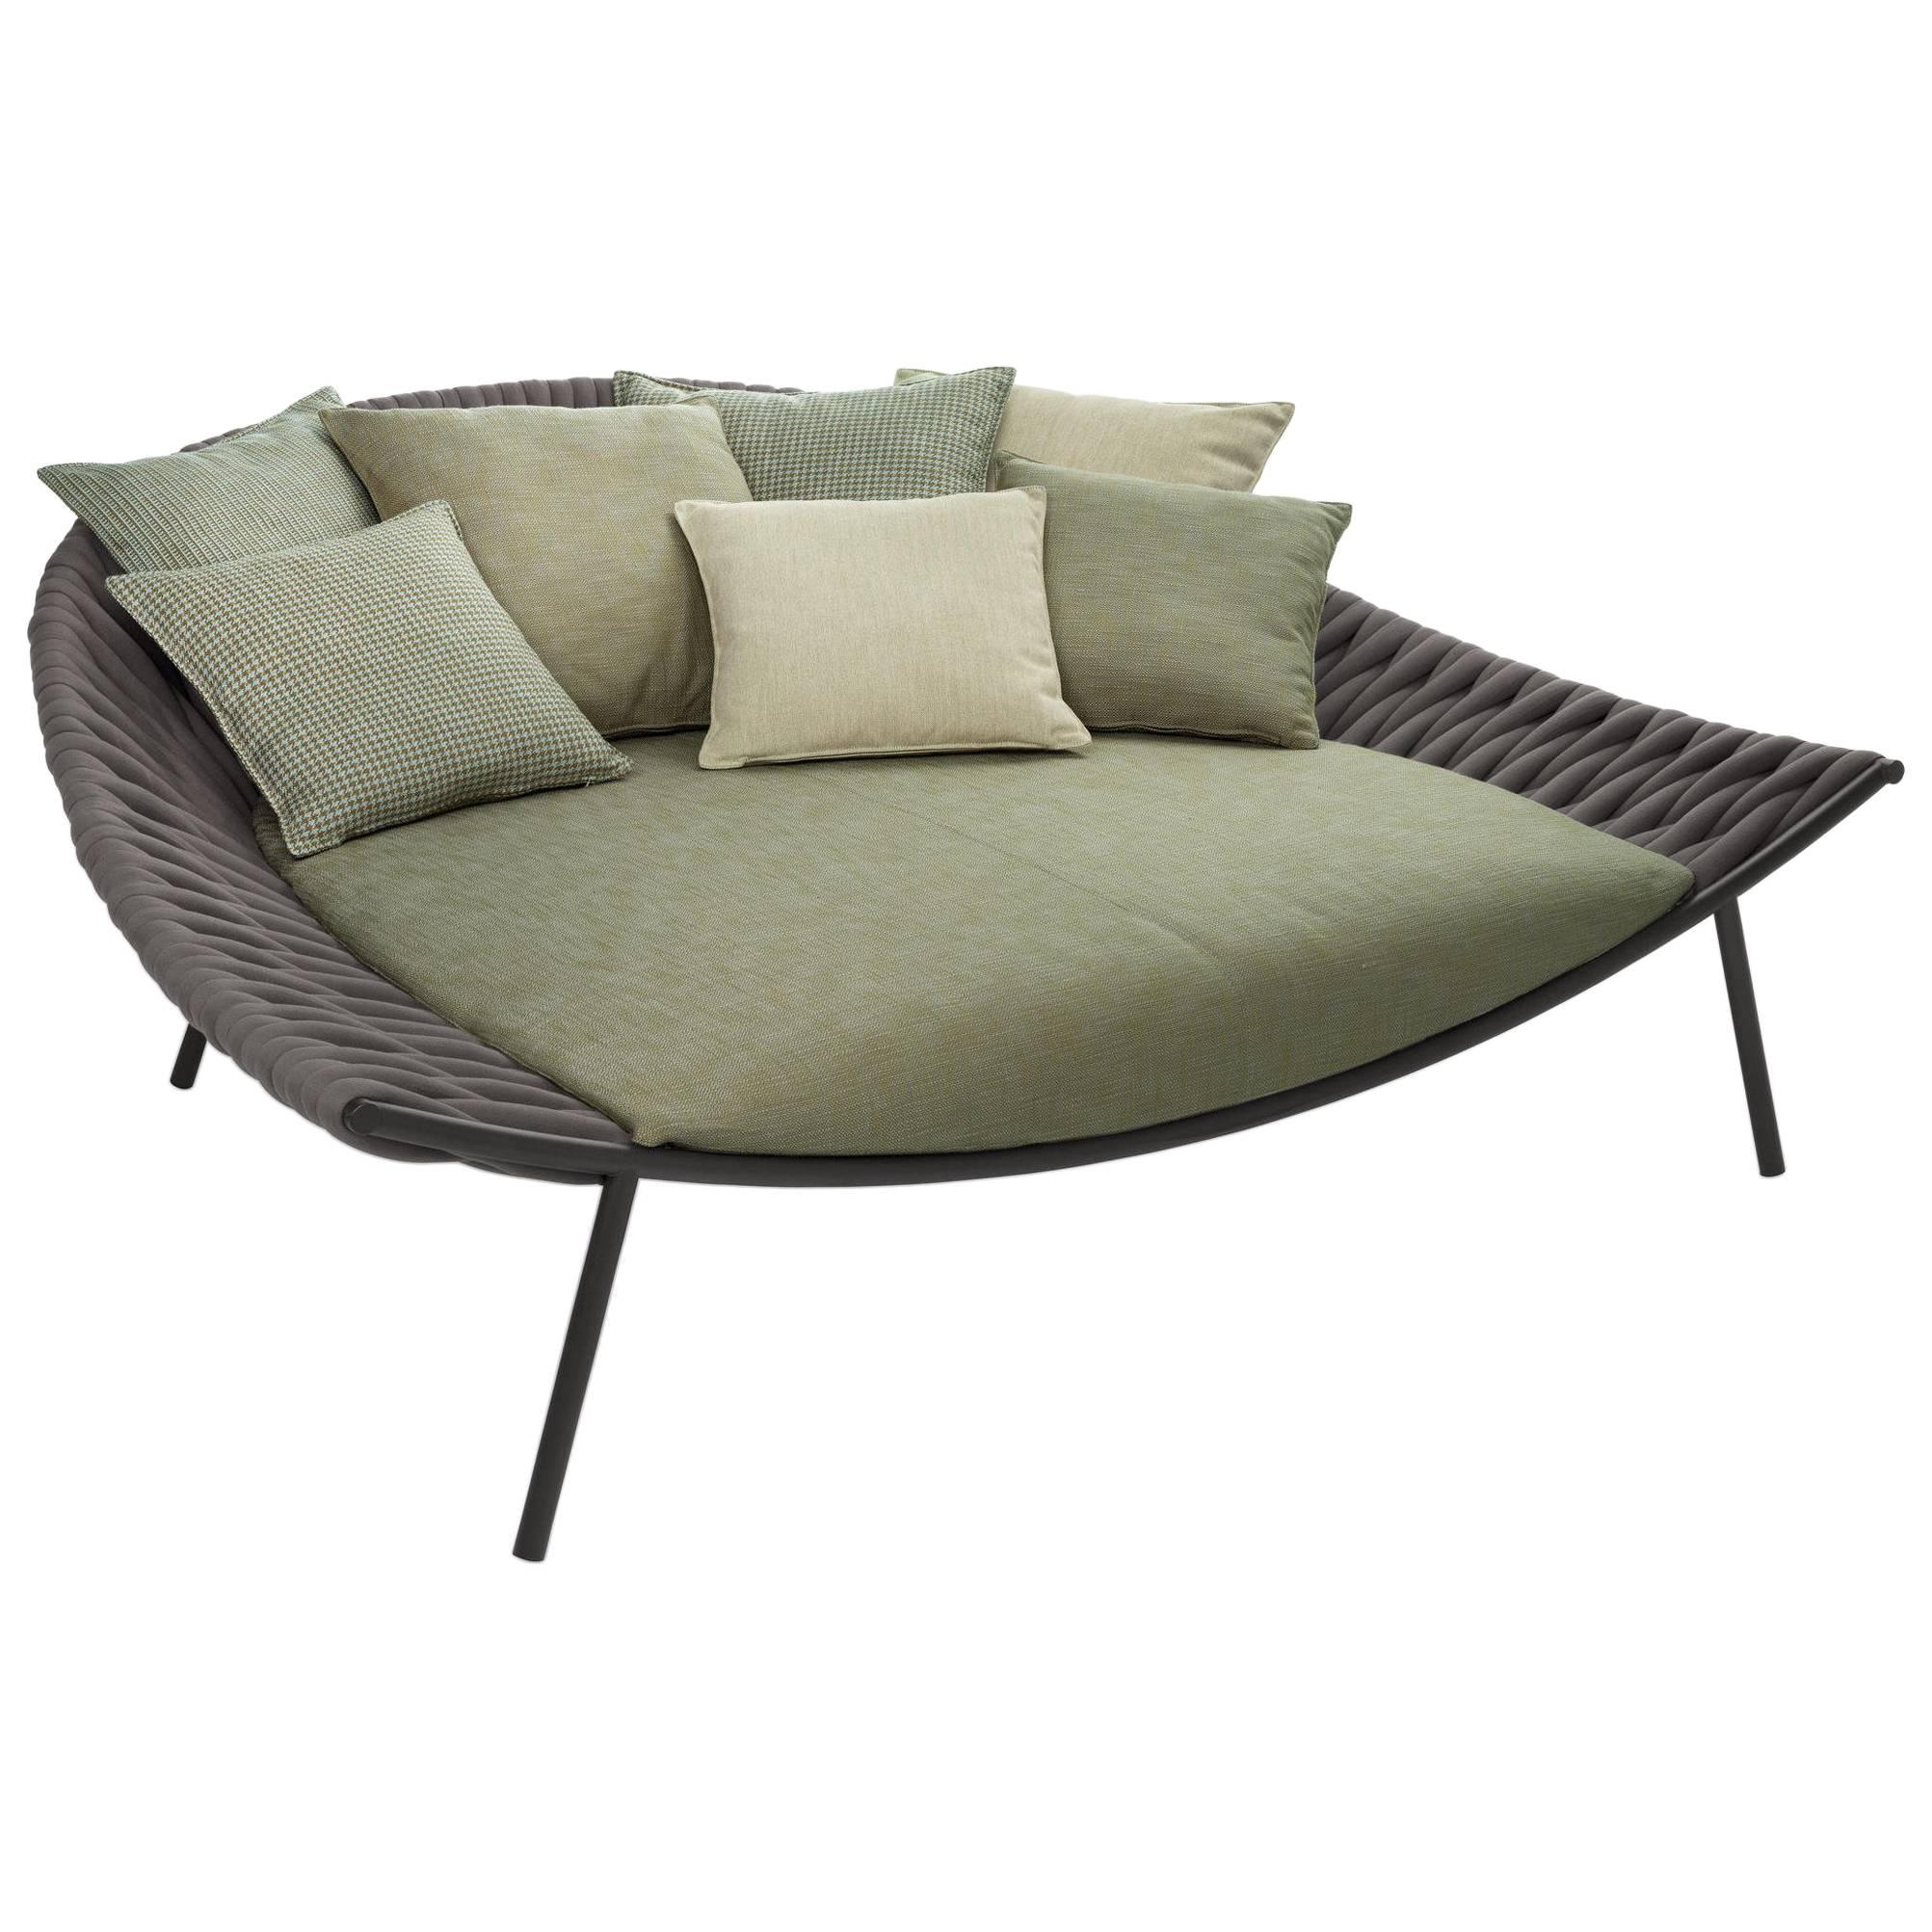 Roda Arena Daybed or Lounge for Outdoors For Sale